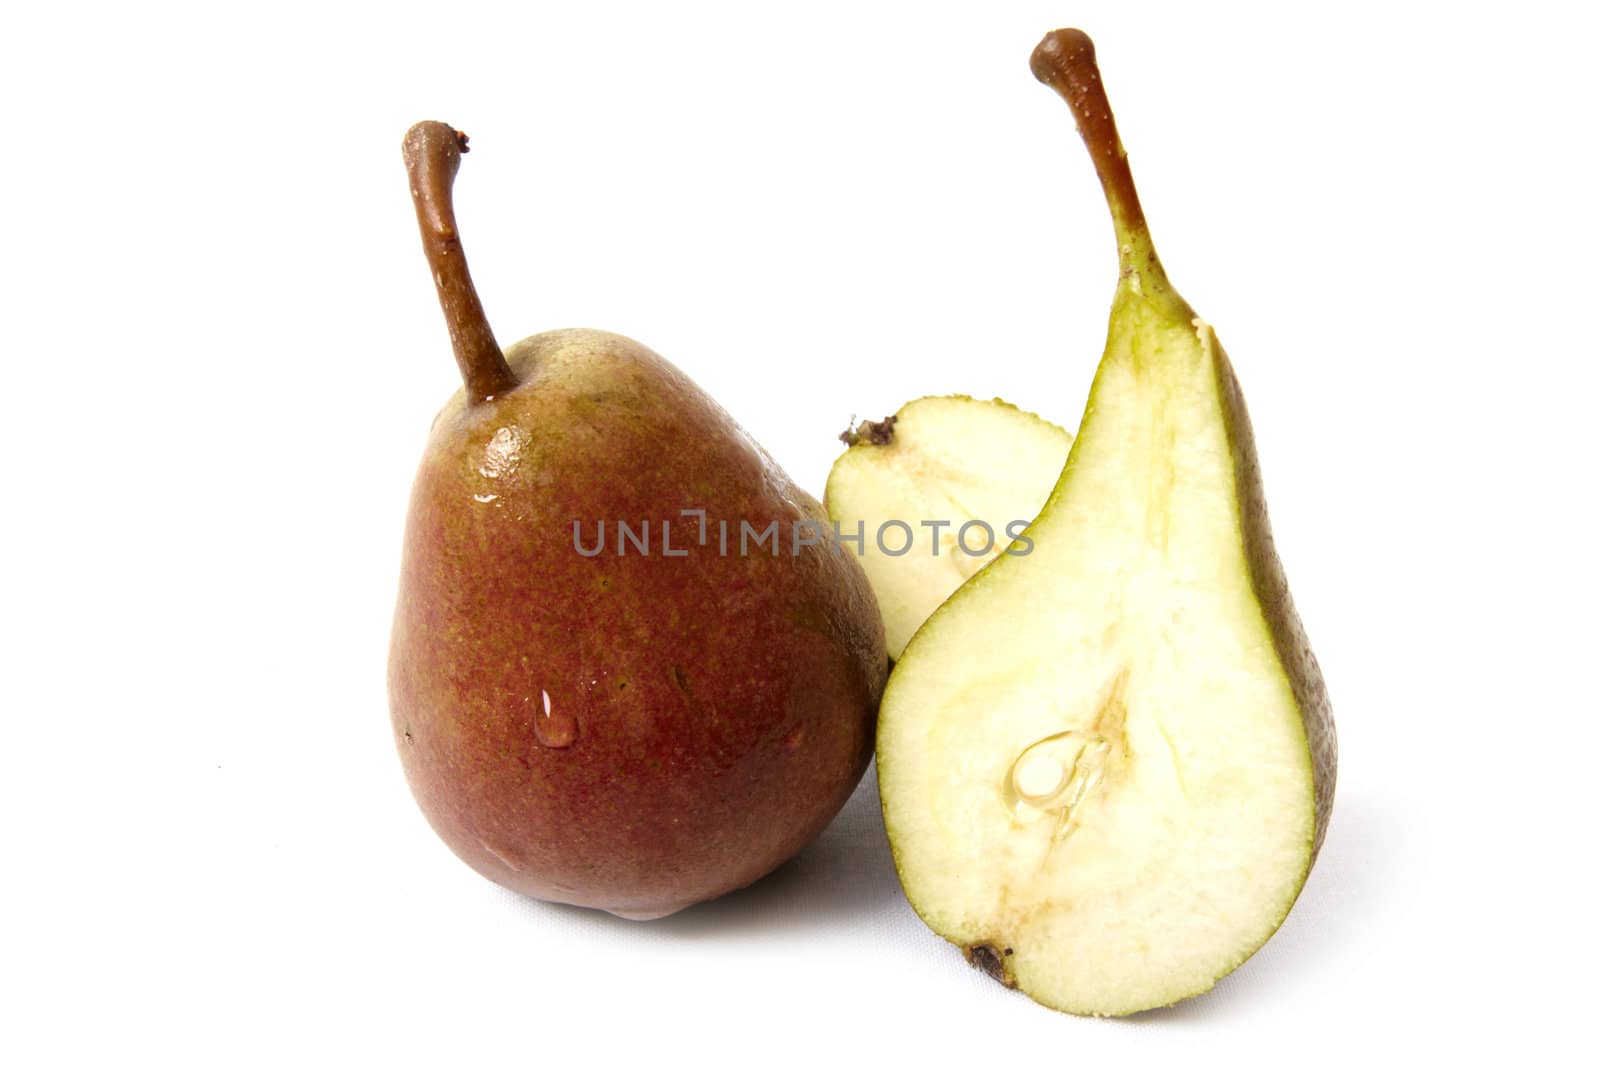 Sliced ripe pear isolated on white background. Photo taken in august, 2009